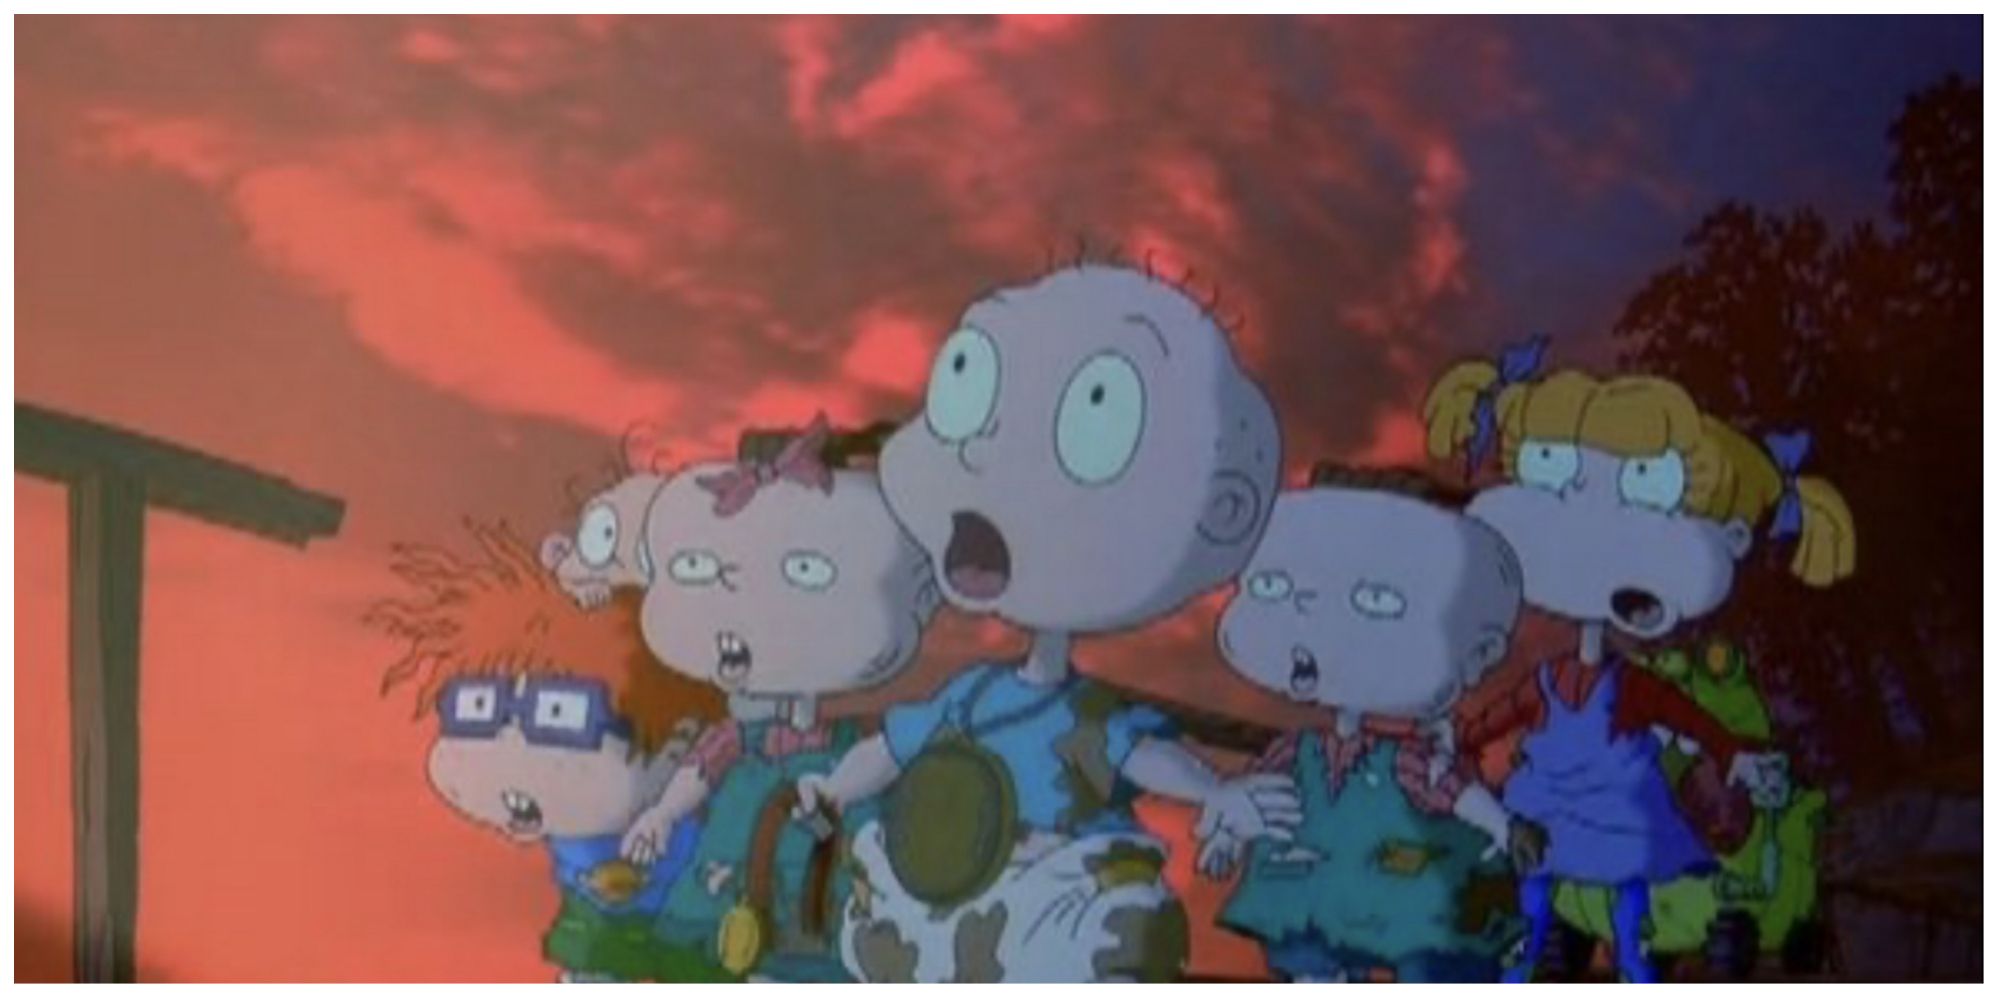 The Rugrats Movie in 1998